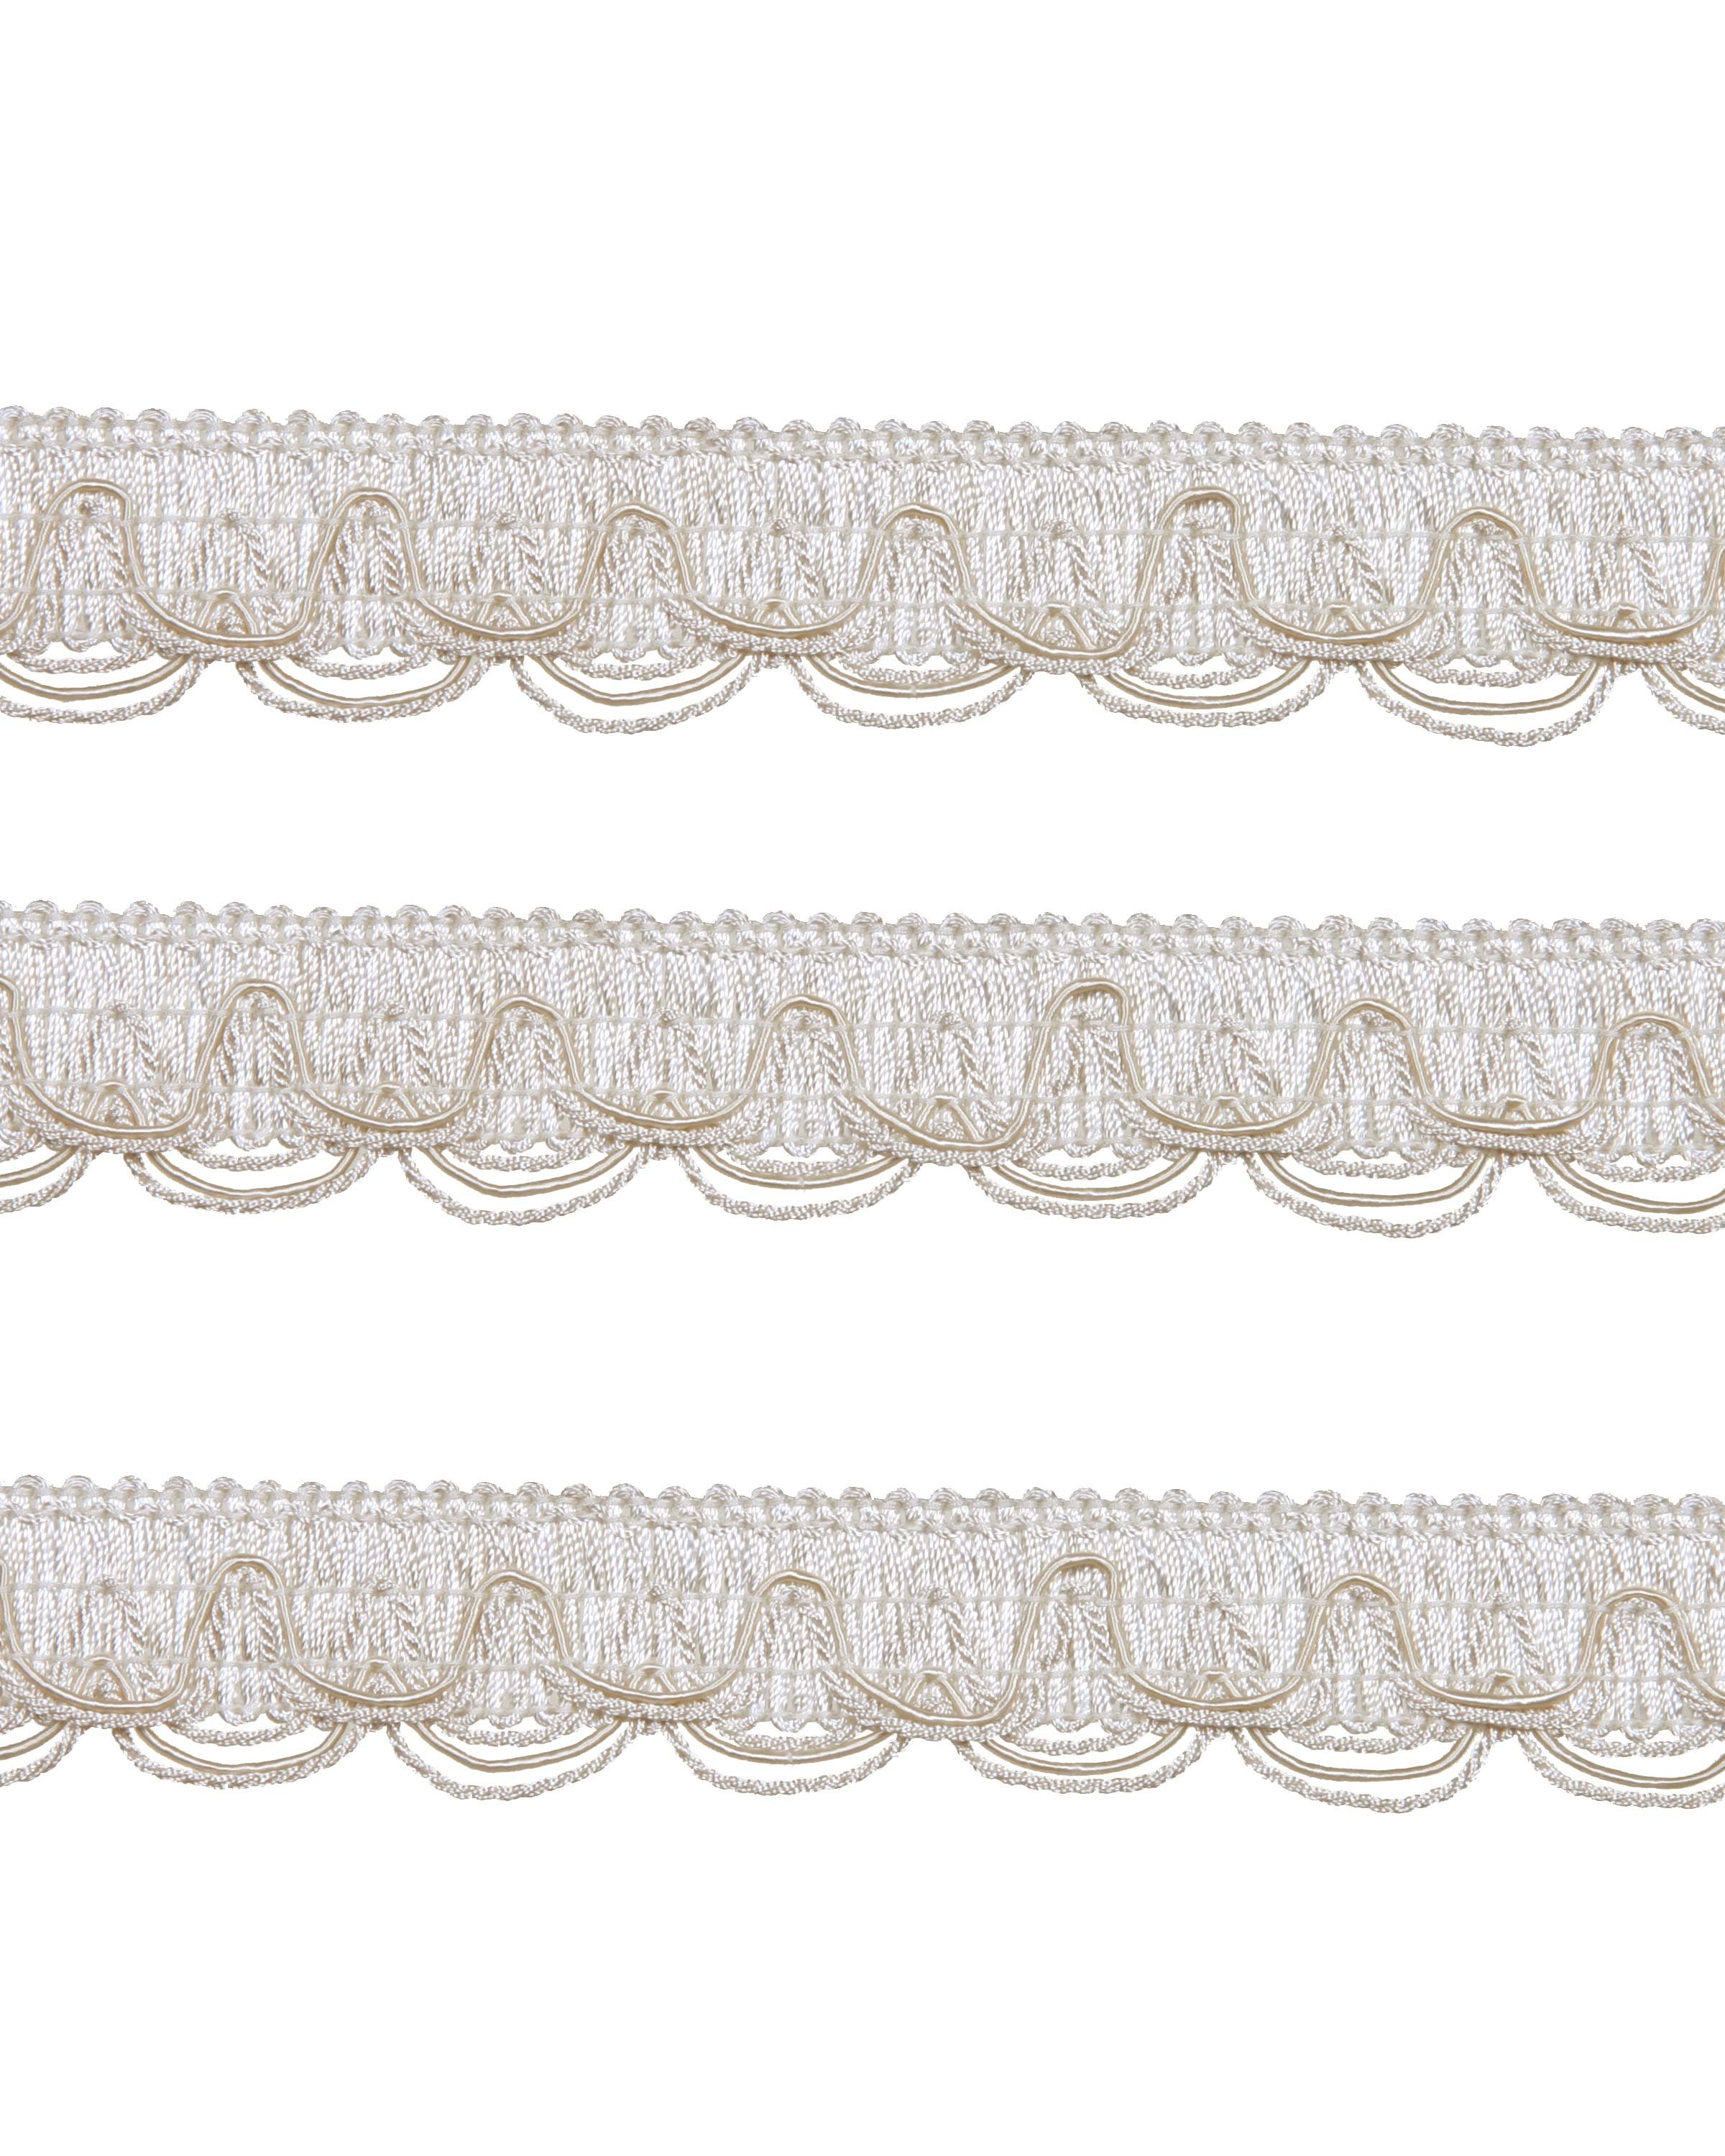 Scalloped Looped Braid - Cream 30mm Price is for 5 metres